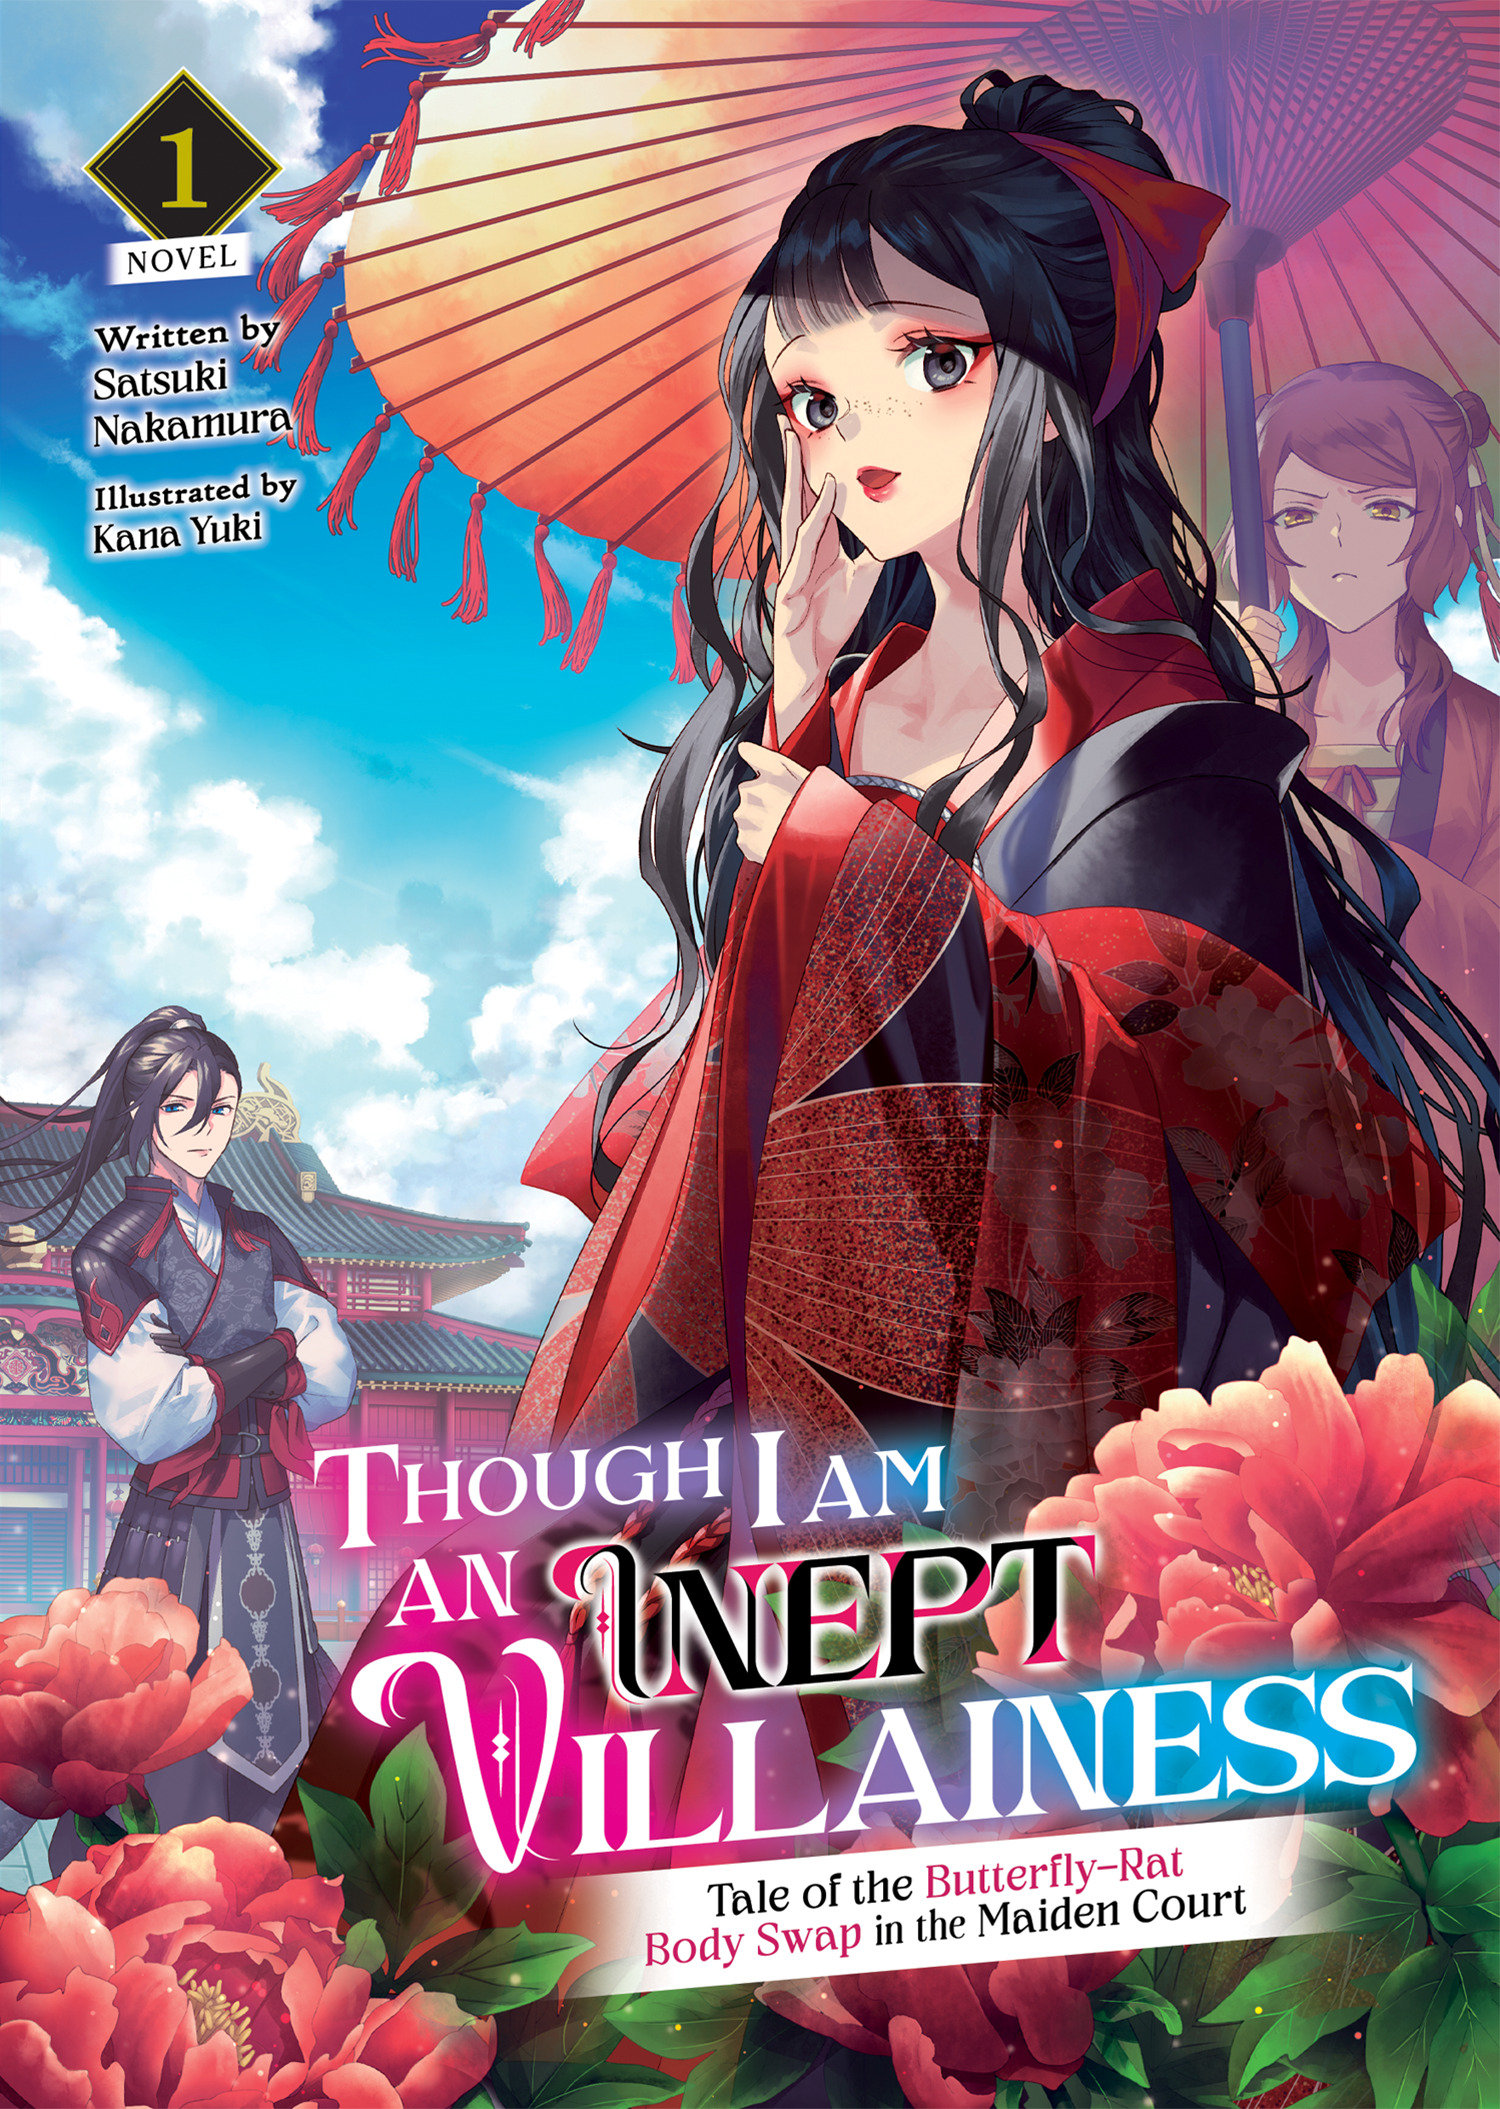 Though I am an Inept Villainess: Tale of the Butterfly-Rat Body Swap in the Maiden Court Light Novel Volume 1